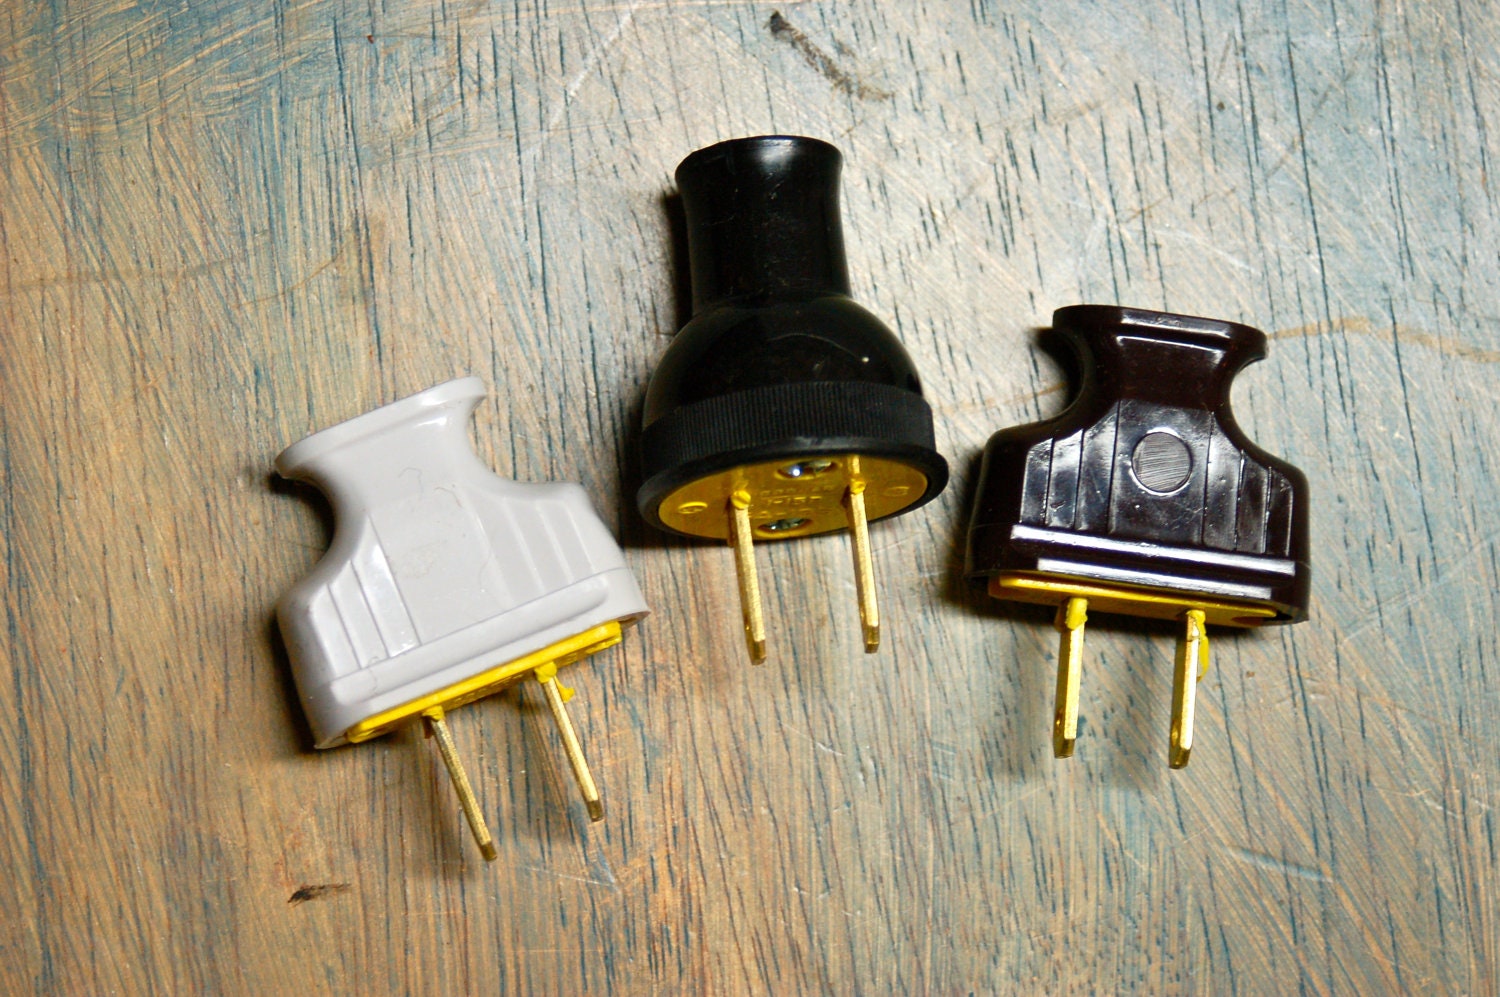 Vintage Style 2 Prong Electrical Plug: Black Brown or White. double neck wiring diagram 